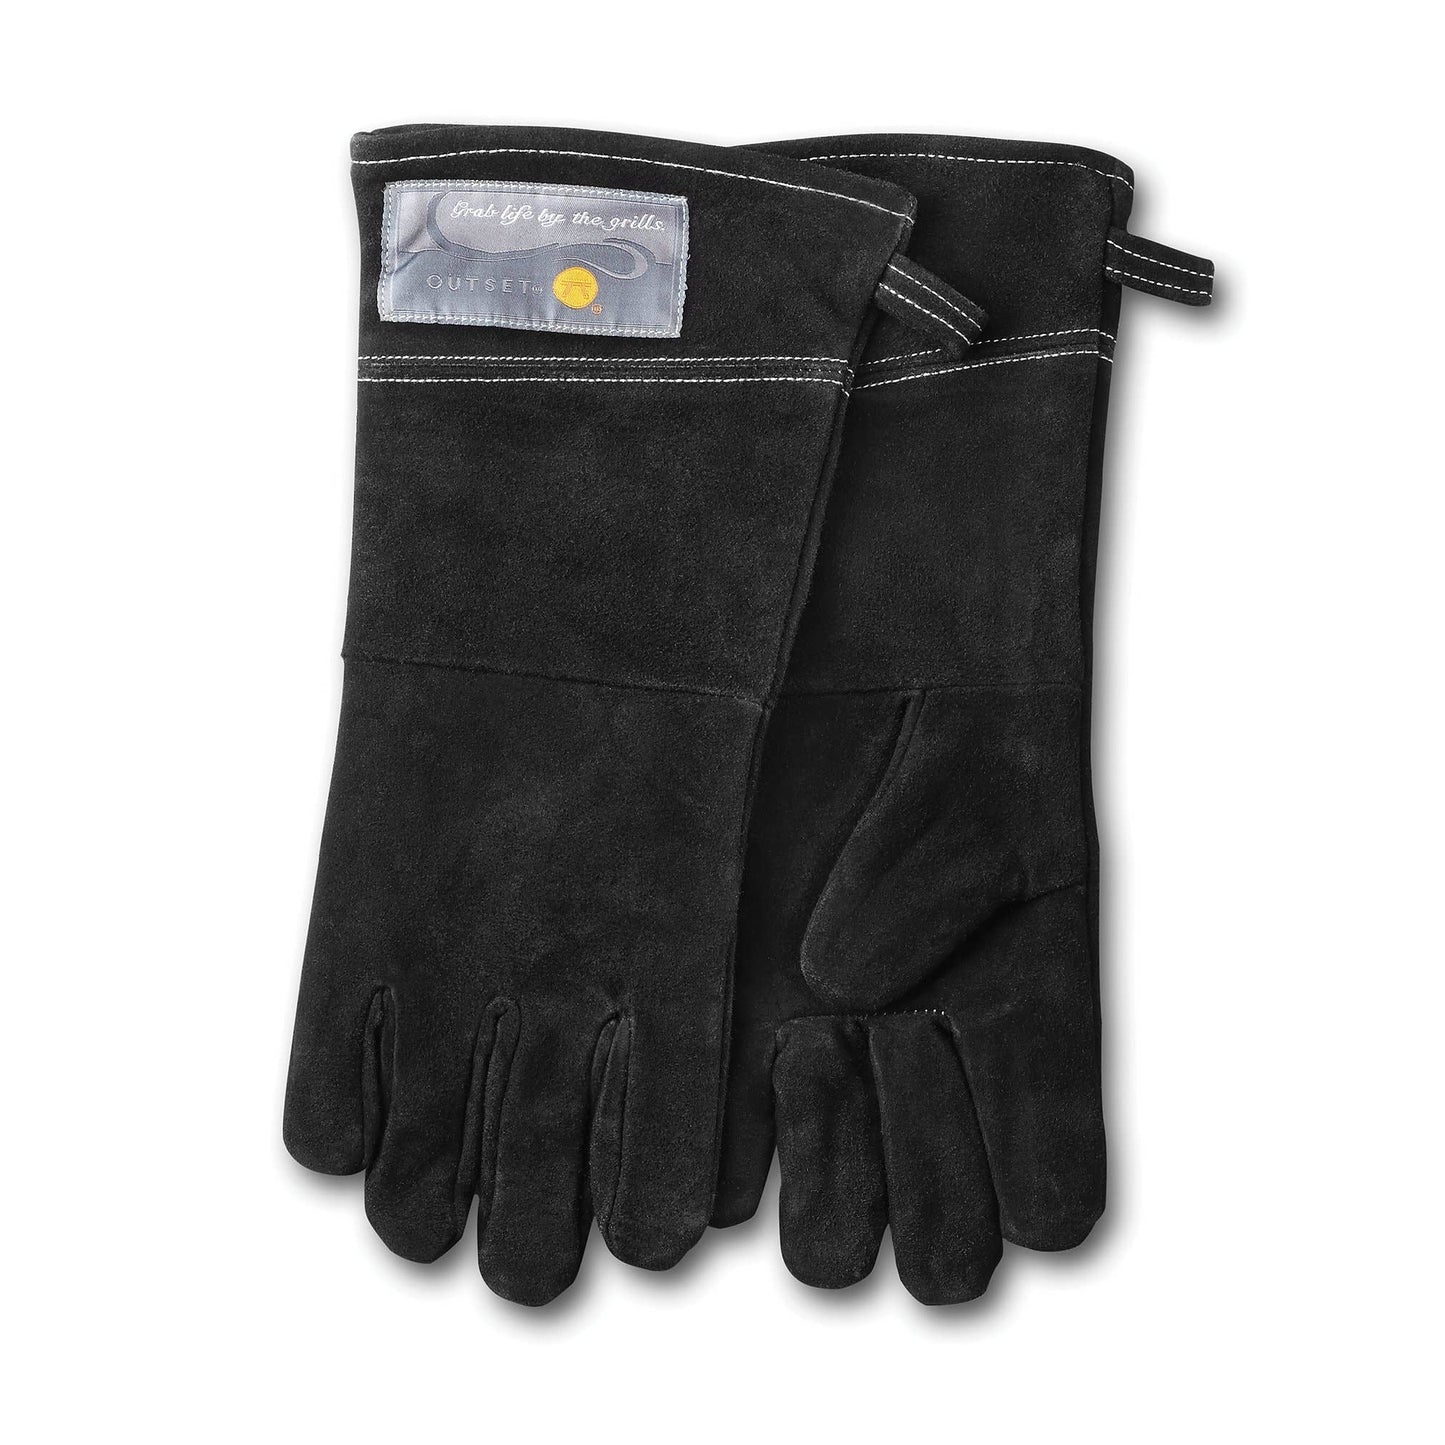 Outset Grill Gloves - Black Leather